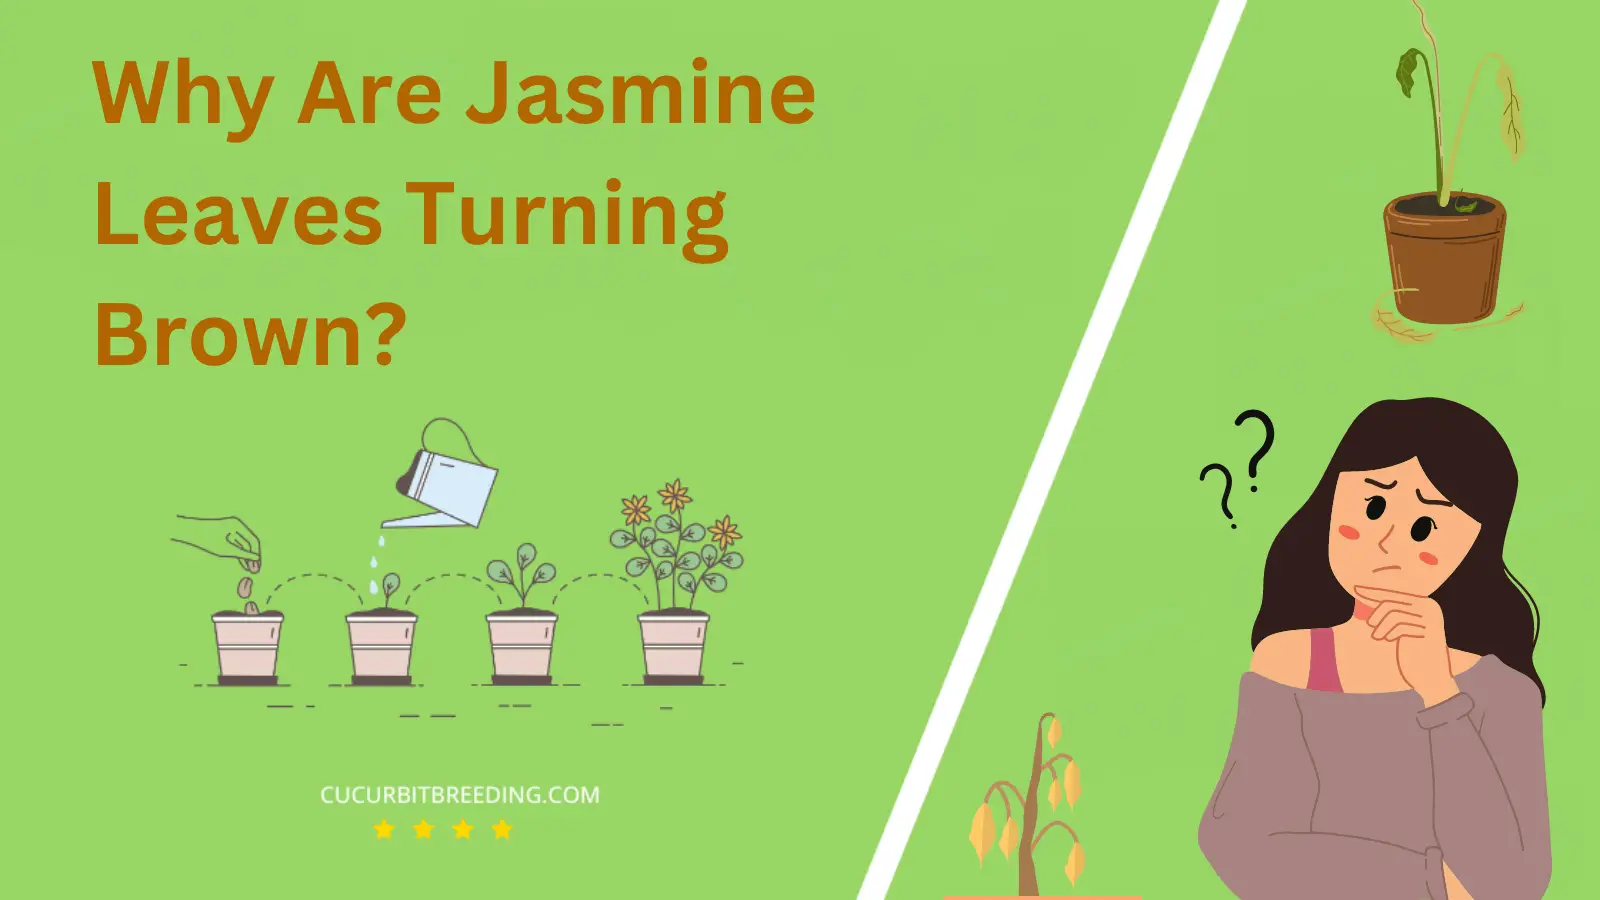 Why Are Jasmine Leaves Turning Brown